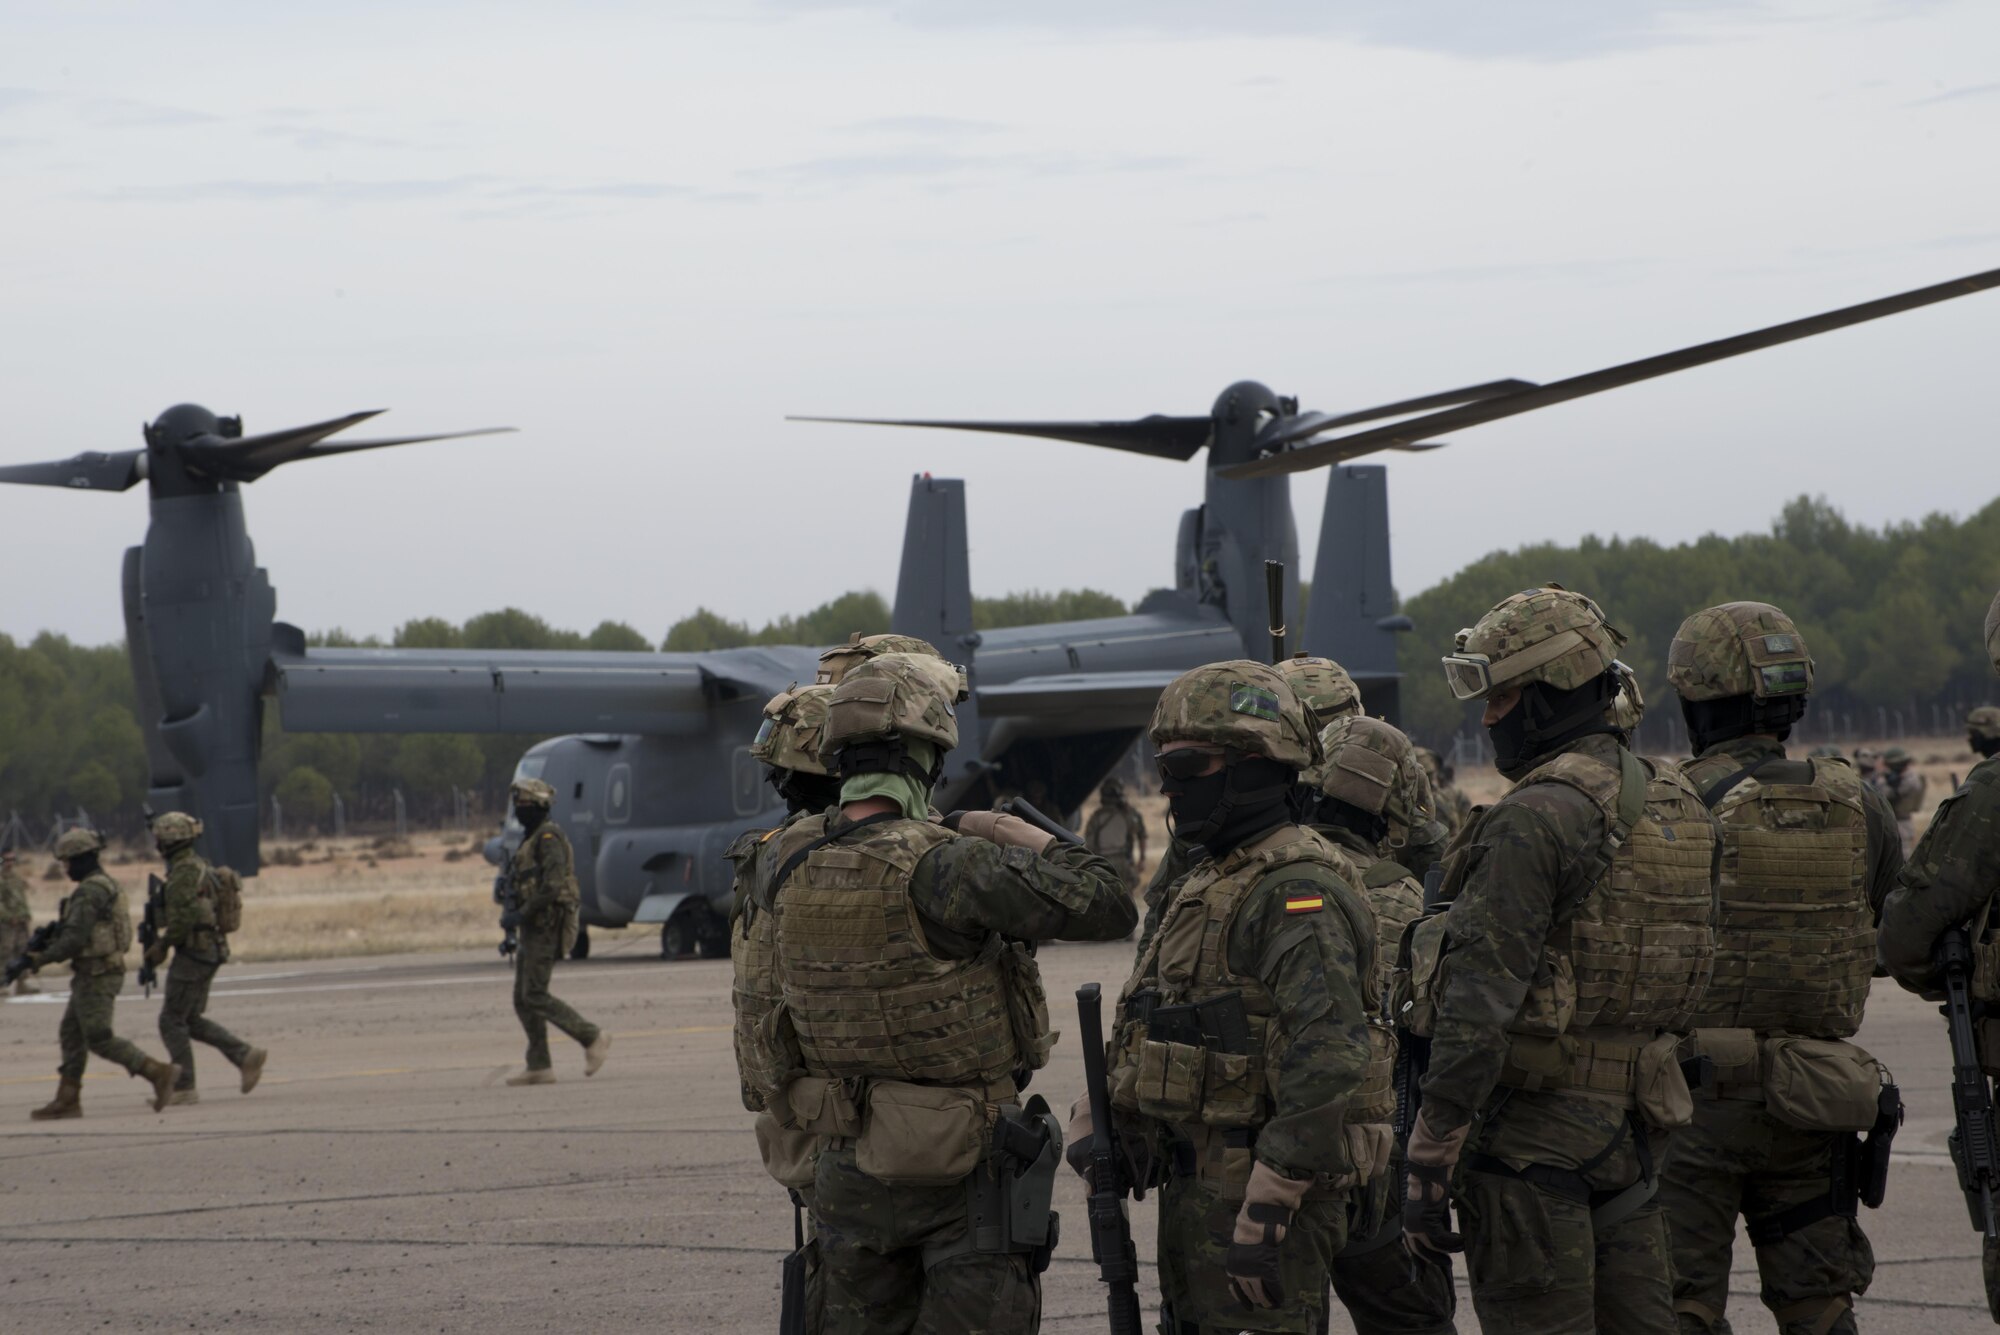 Air commandos prepare to board a CV-22 Osprey from the 352d Special Operations Wing in Almagro, Spain, Oct 24, 2015. The event was held as a part of TRIDENT JUNCTURE where partner nations trained air and ground forces on personnel rapid on and off-loading techniques. U.S. Air Force photo by 1st Lt. Chris Sullivan/Released)